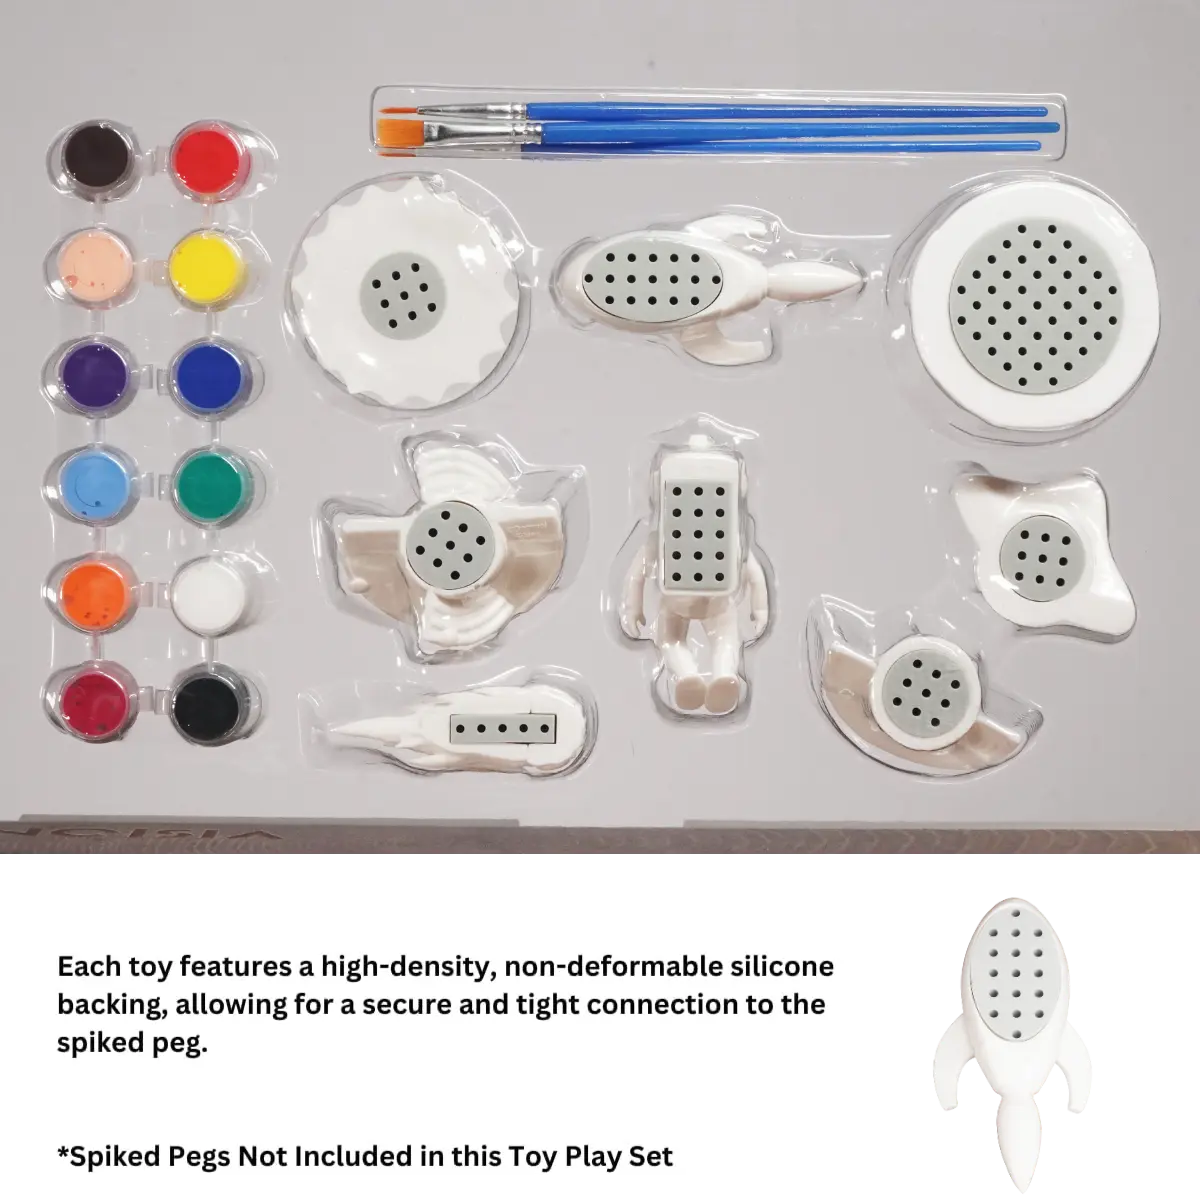 Space Painting Kit.